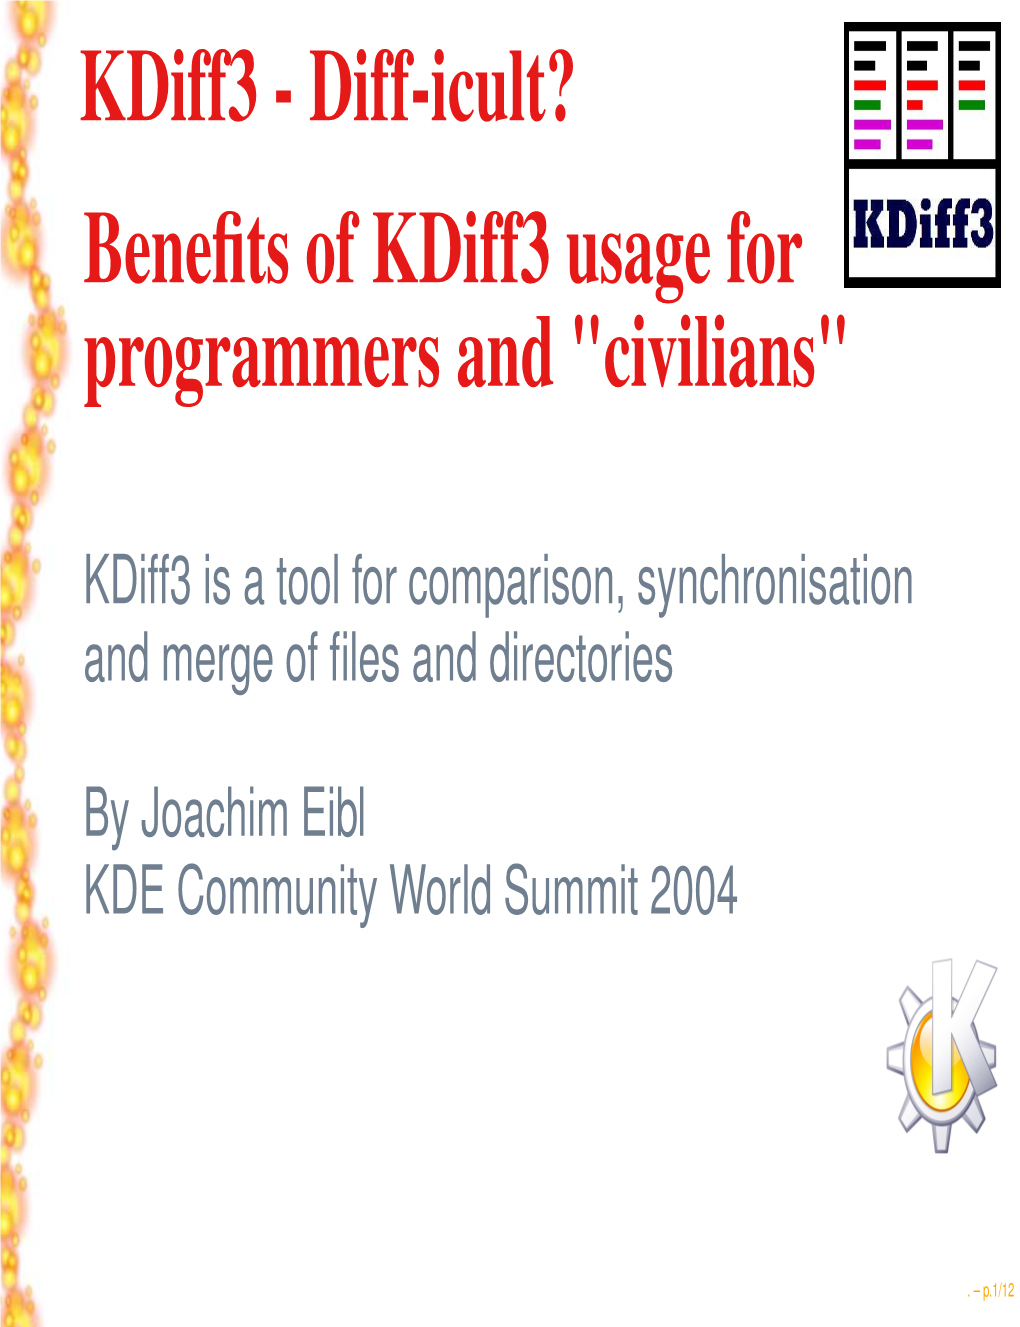 Kdiff3 - Diff-Icult? Beneﬁts of Kdiff3 Usage for Programmers and "Civilians"